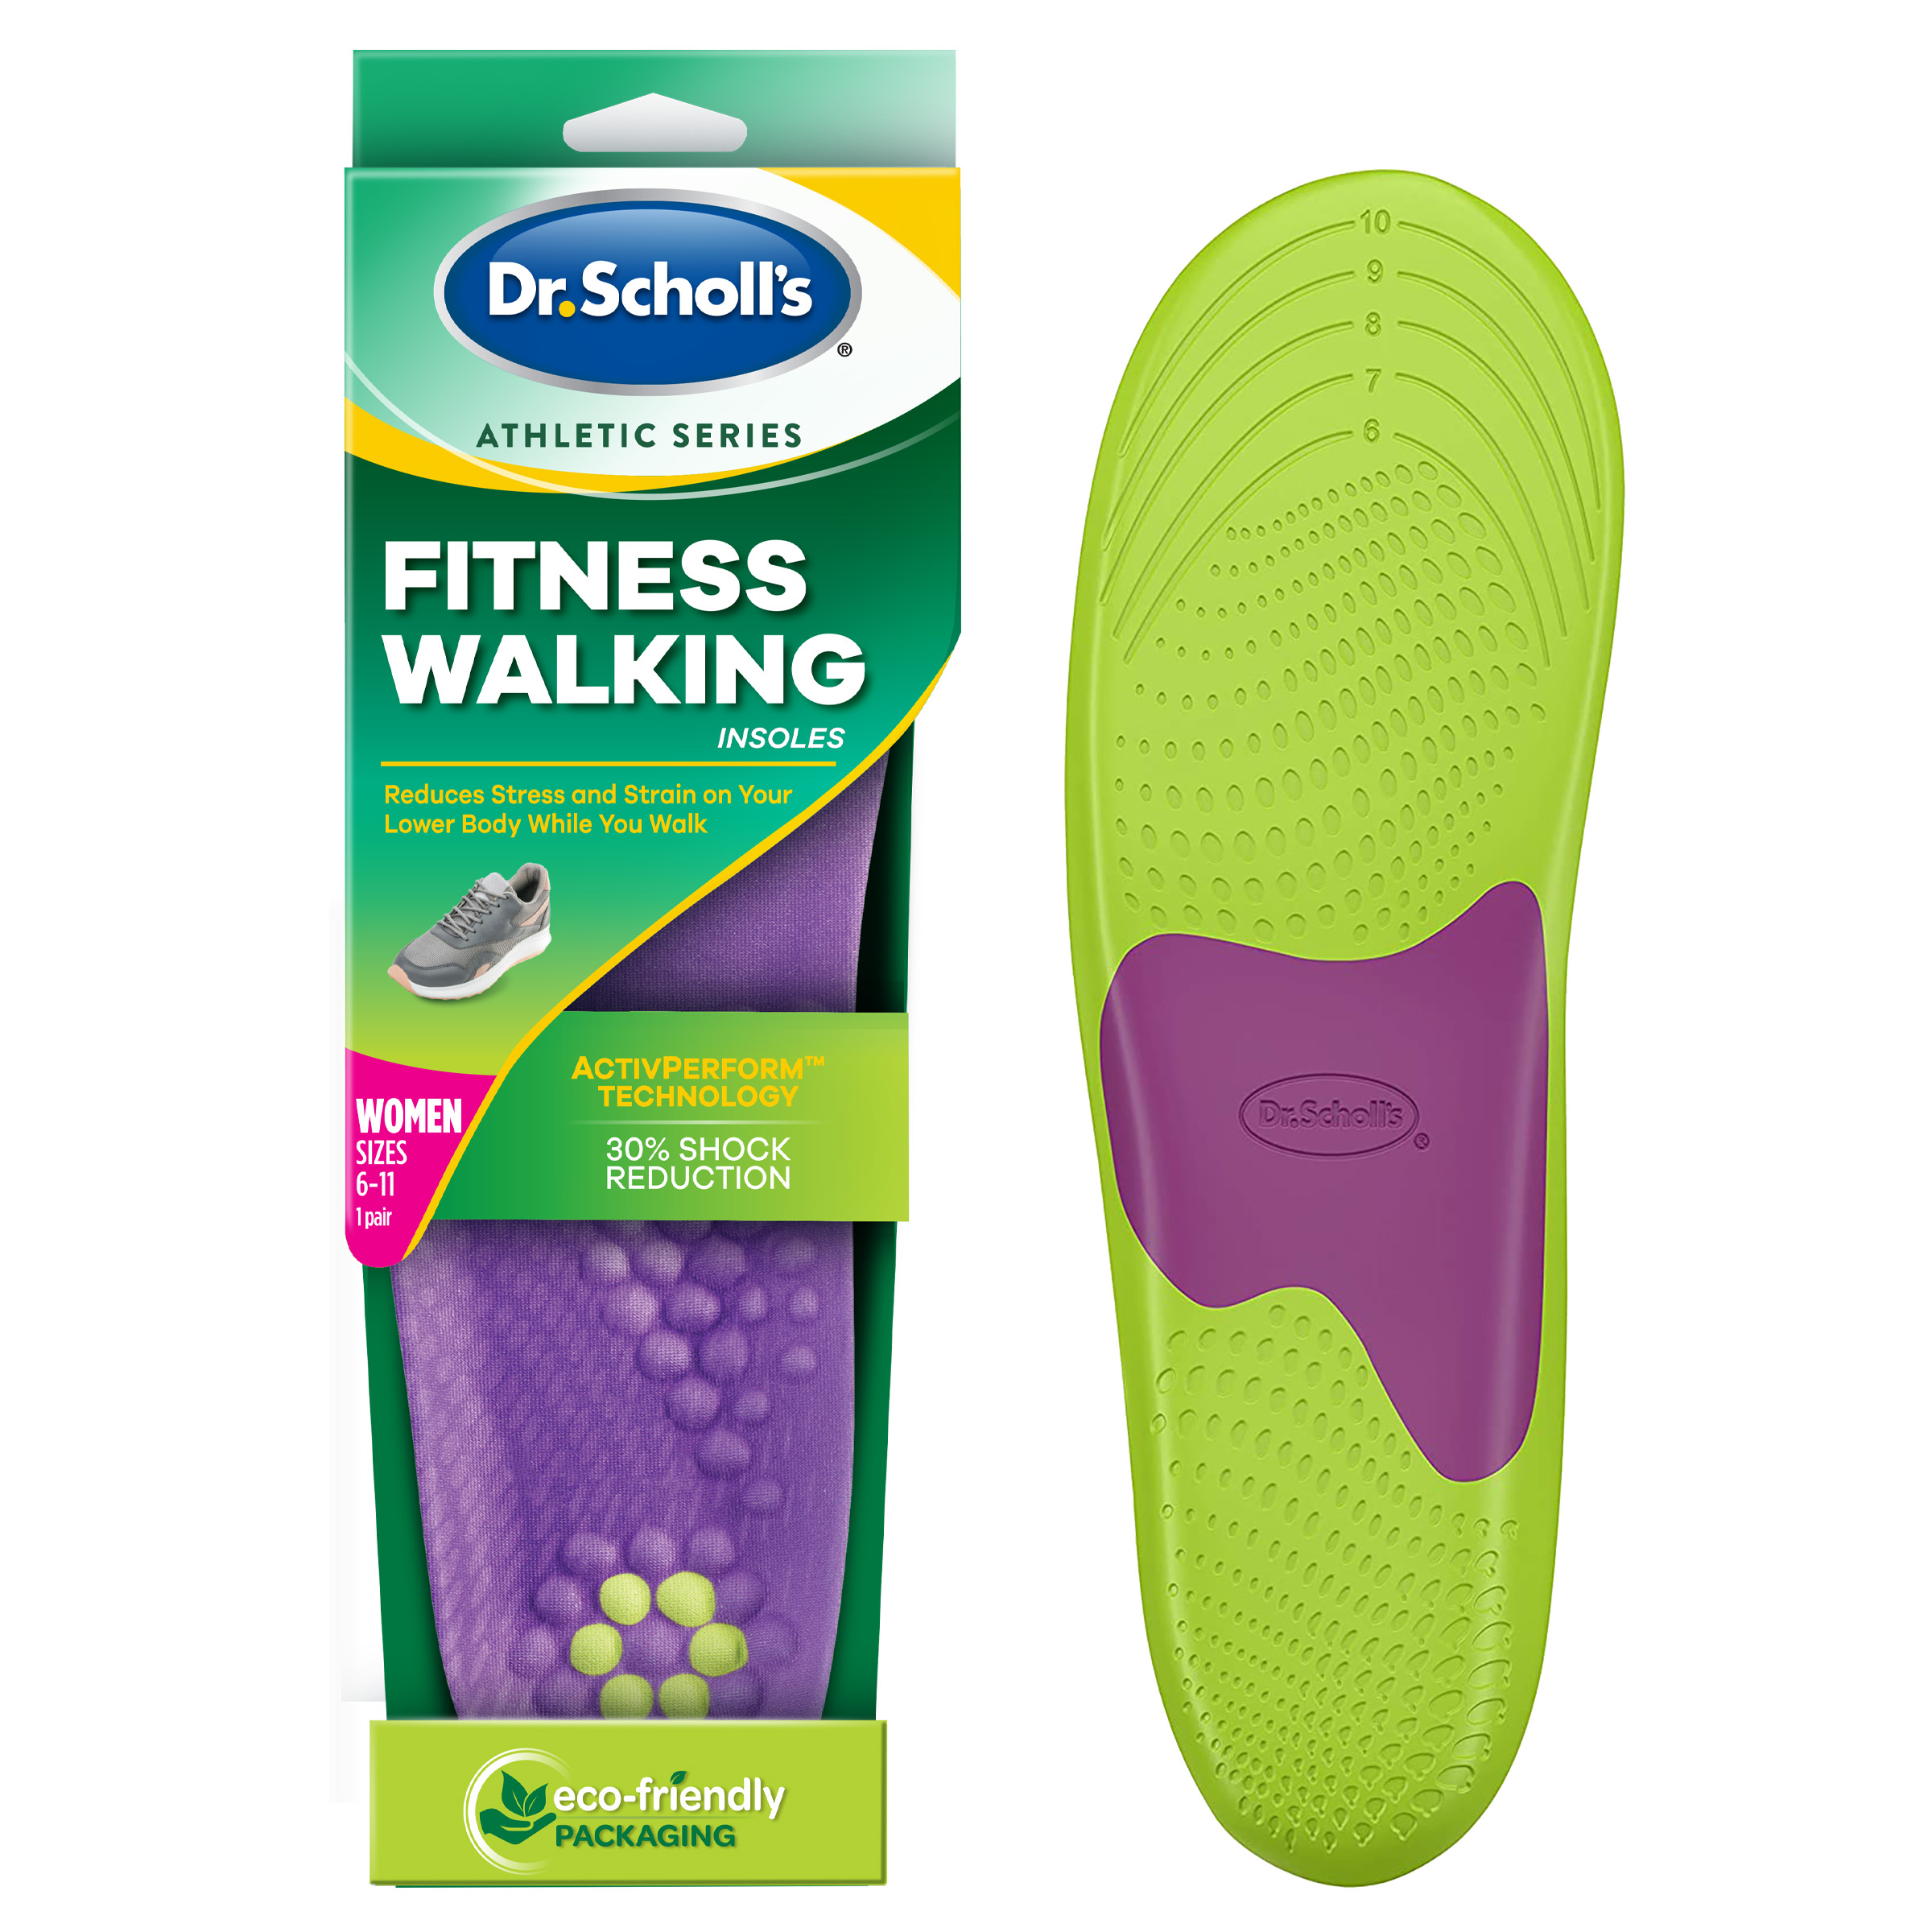 Dr. Scholl's Fitness Walking Insoles for Men (6-10) Inserts to Reduce Strain on your Lower Body - image 2 of 4